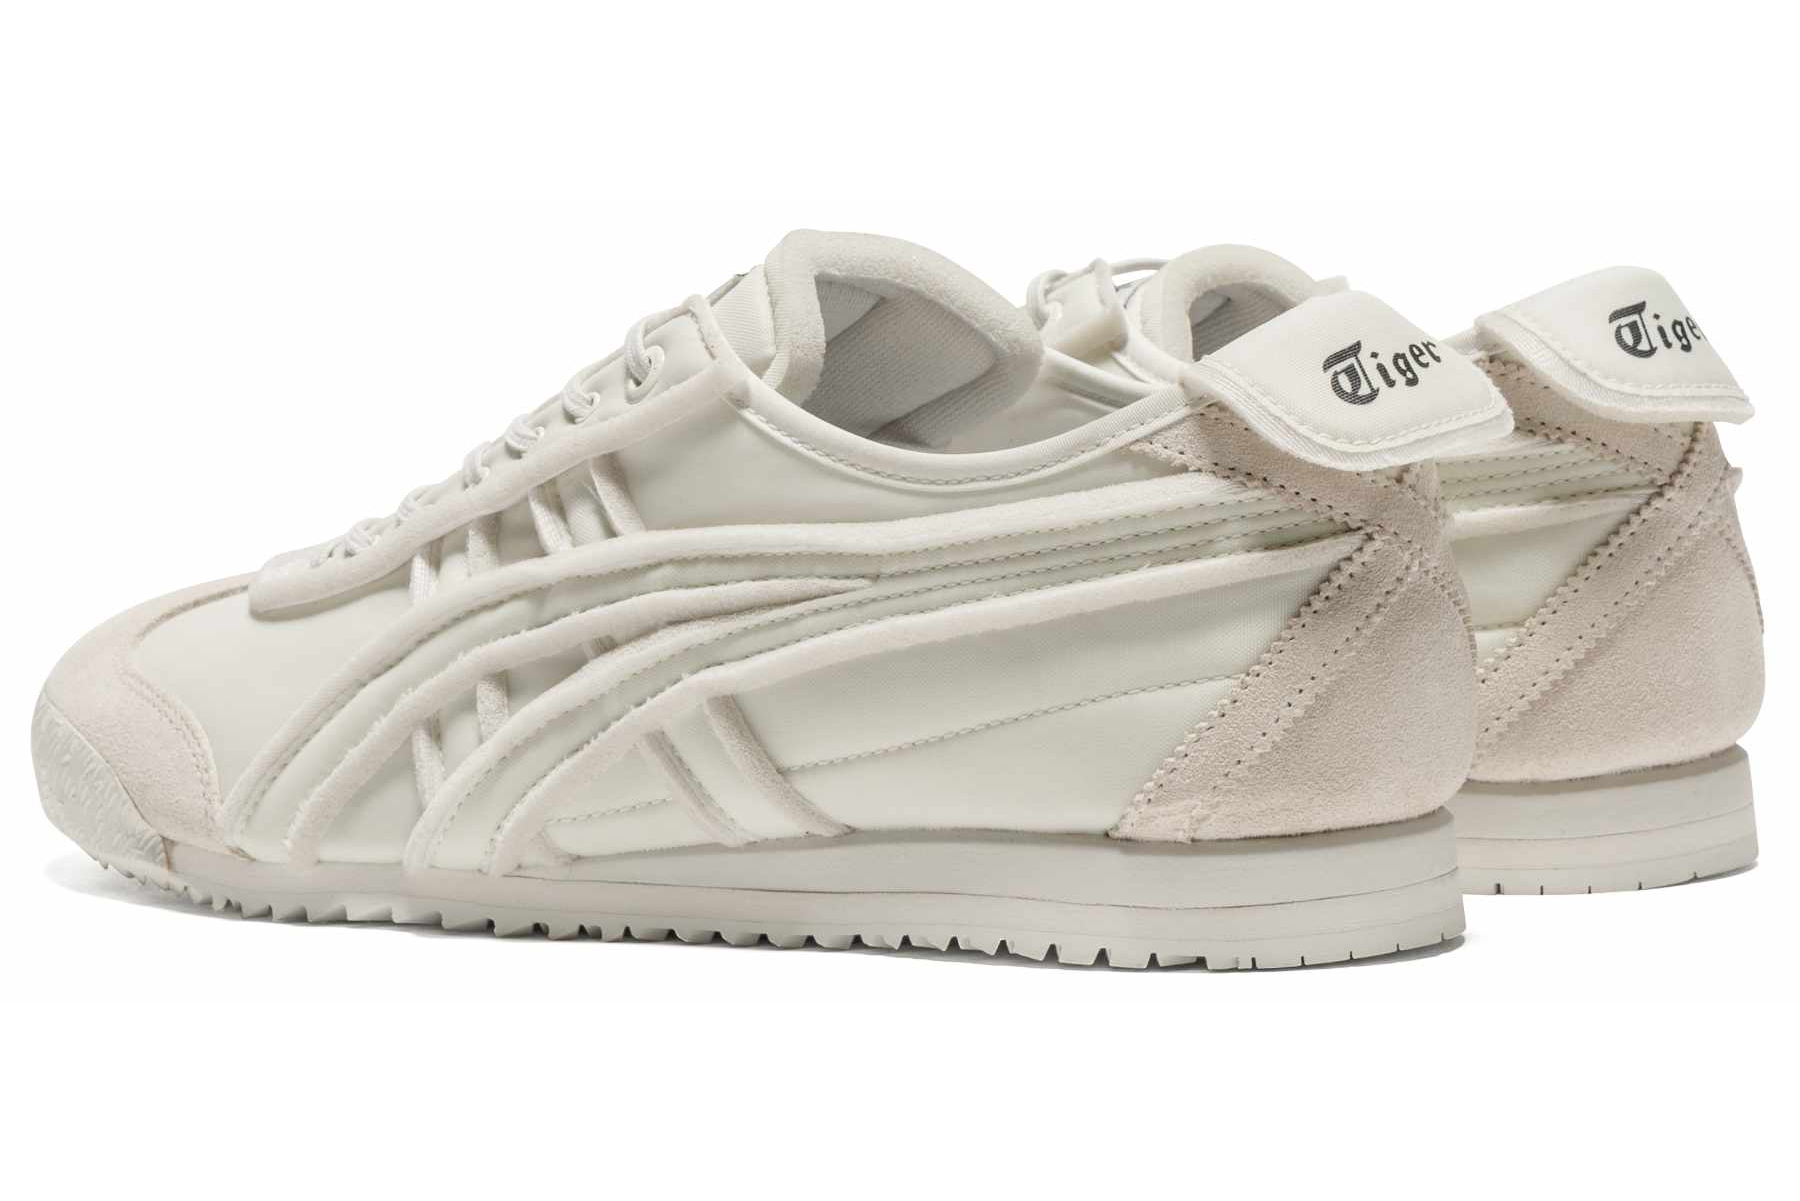 Onitsuka Tiger's New Mexico 66 Shoes Are Borderline Formal